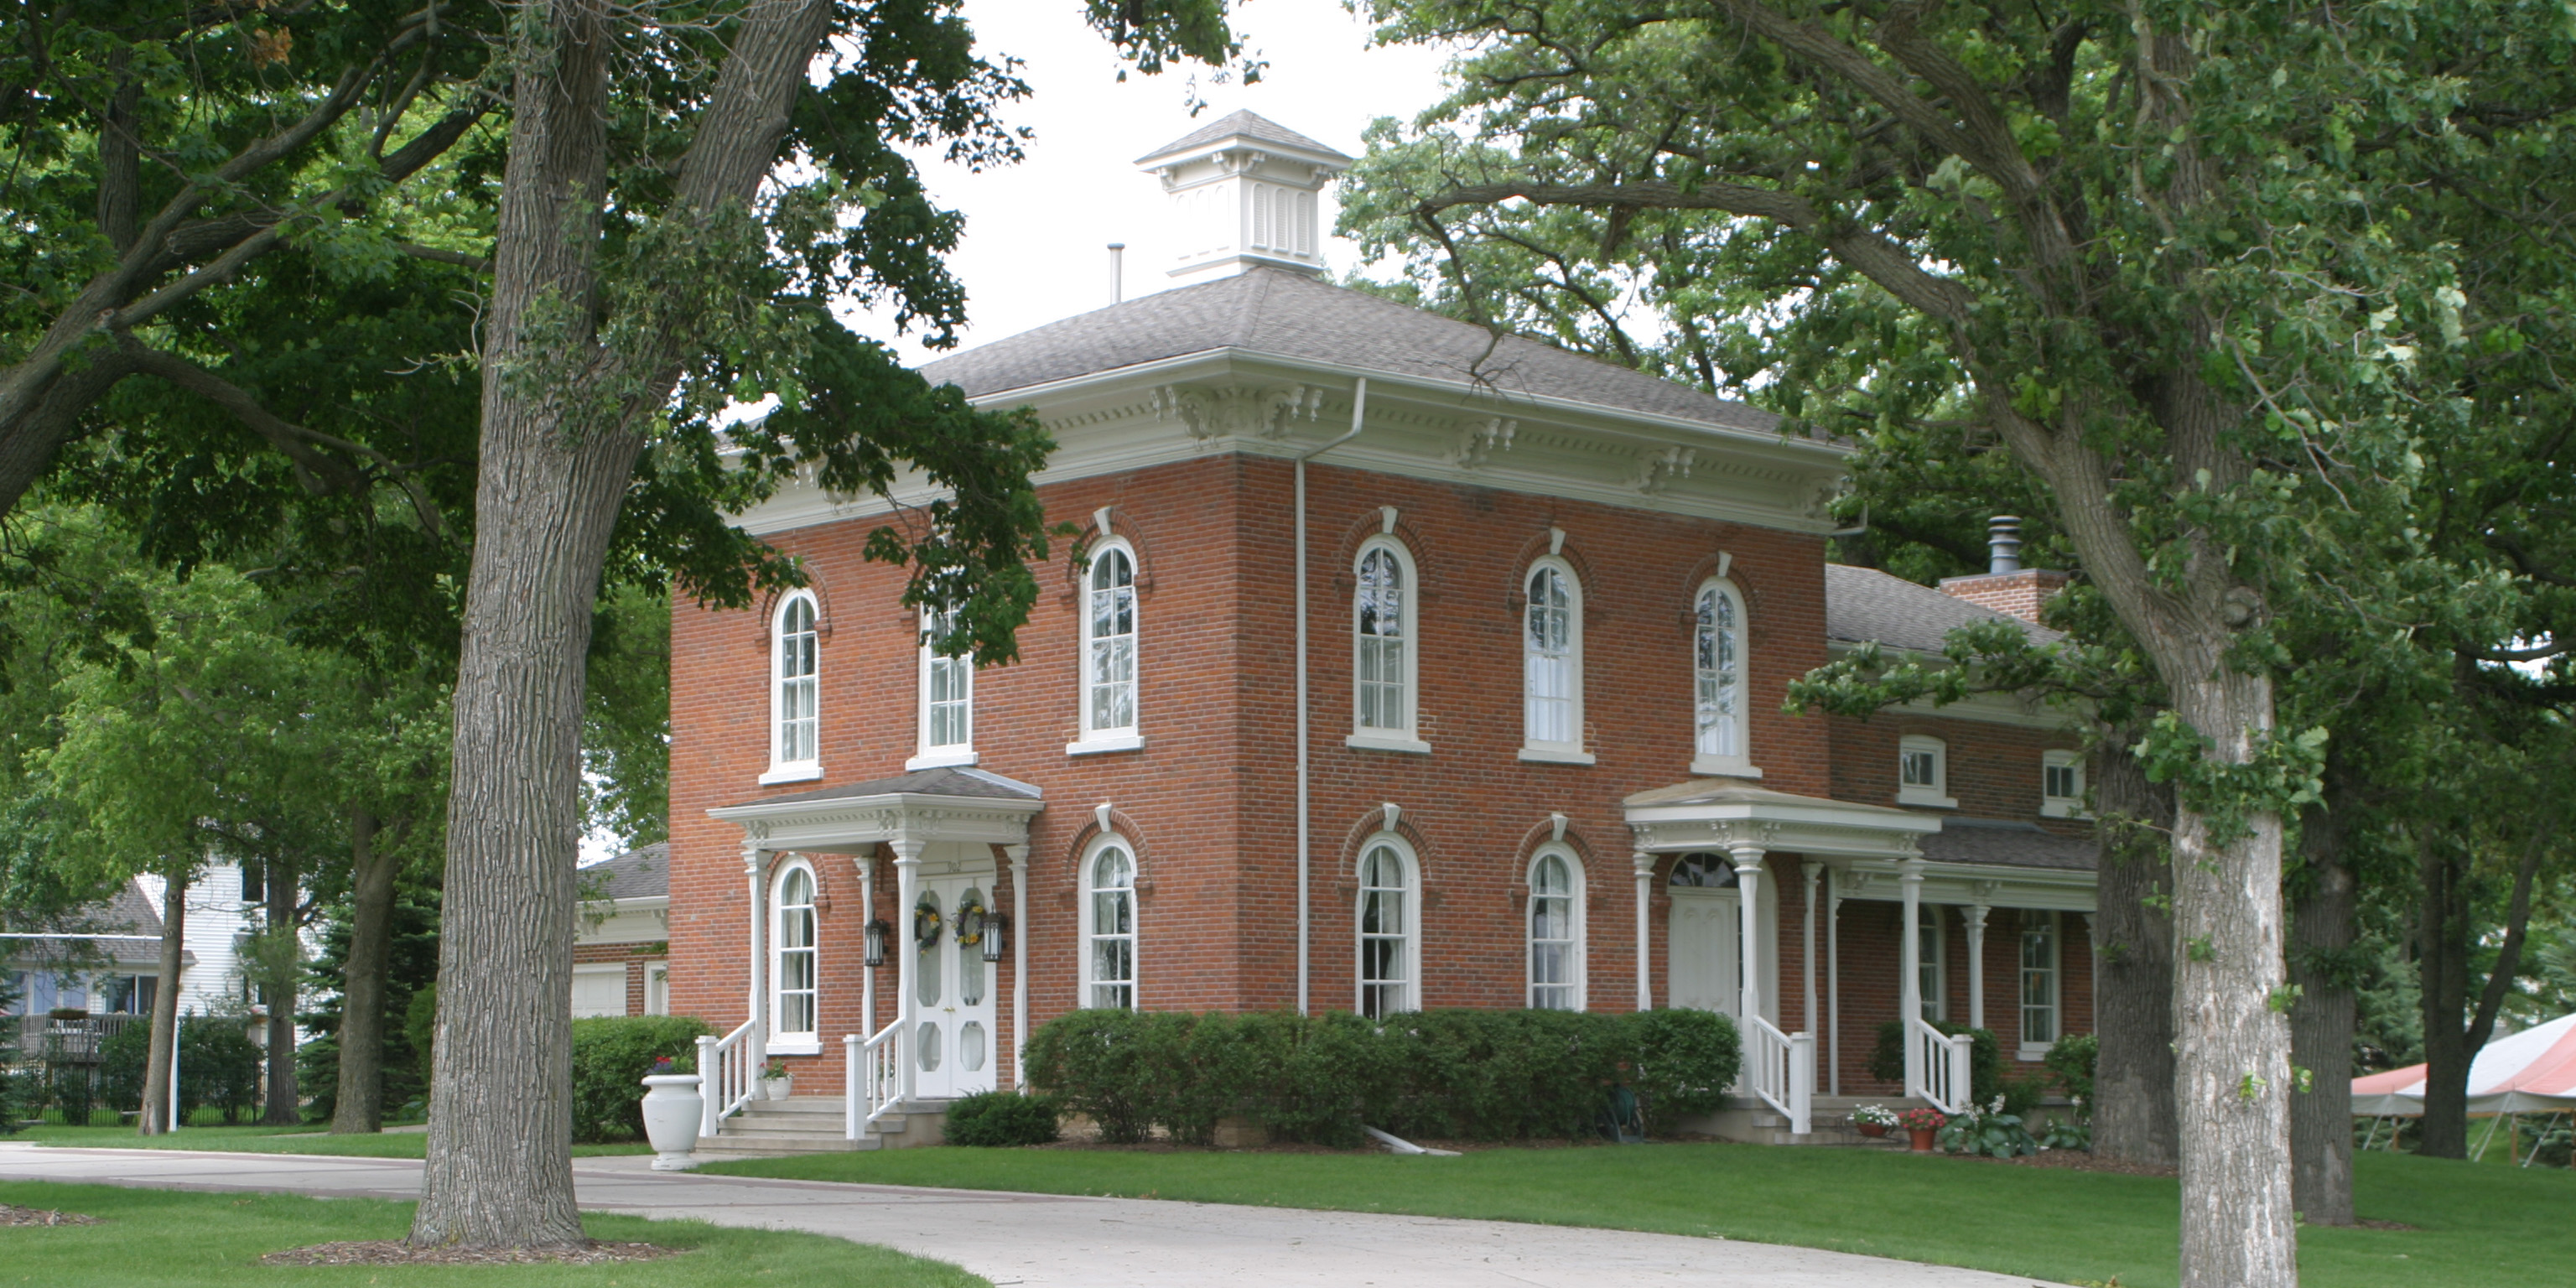 Greenwood, the president's house